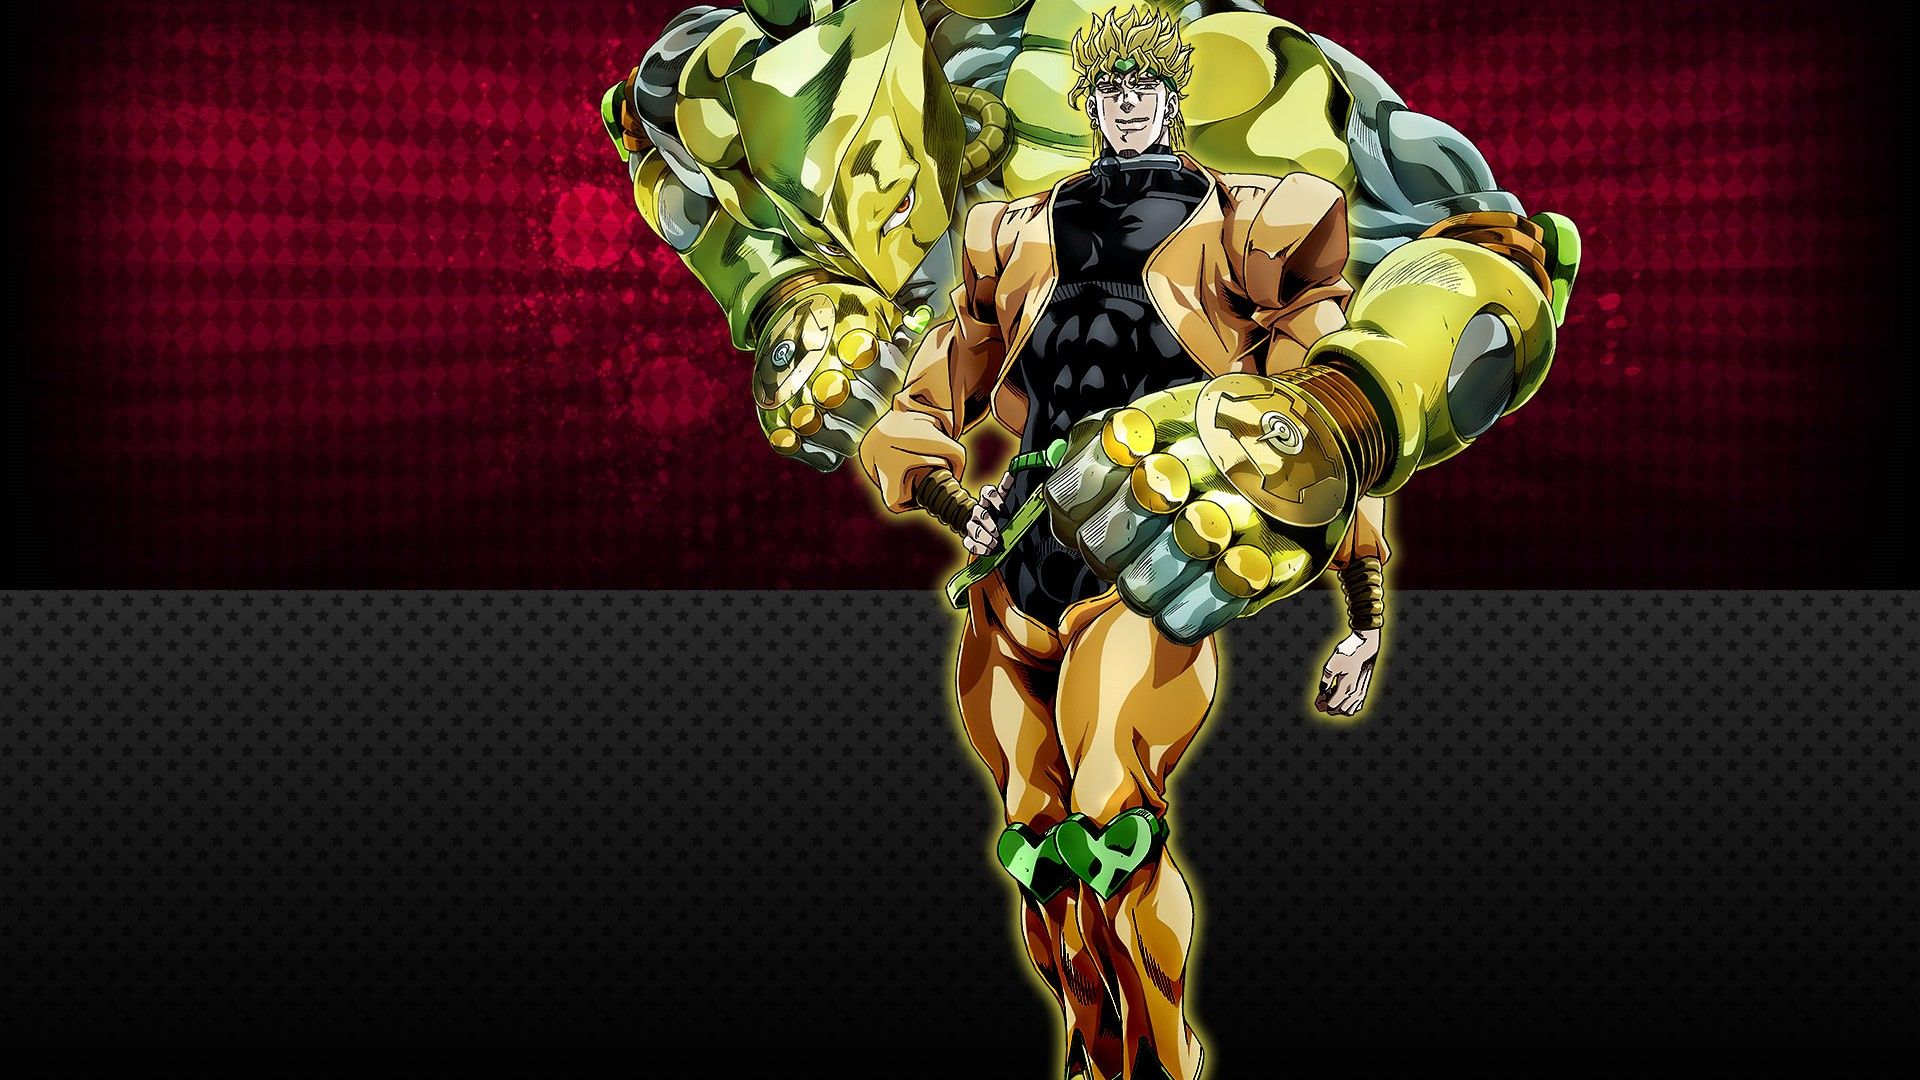 DIO and The World [1920x1080]